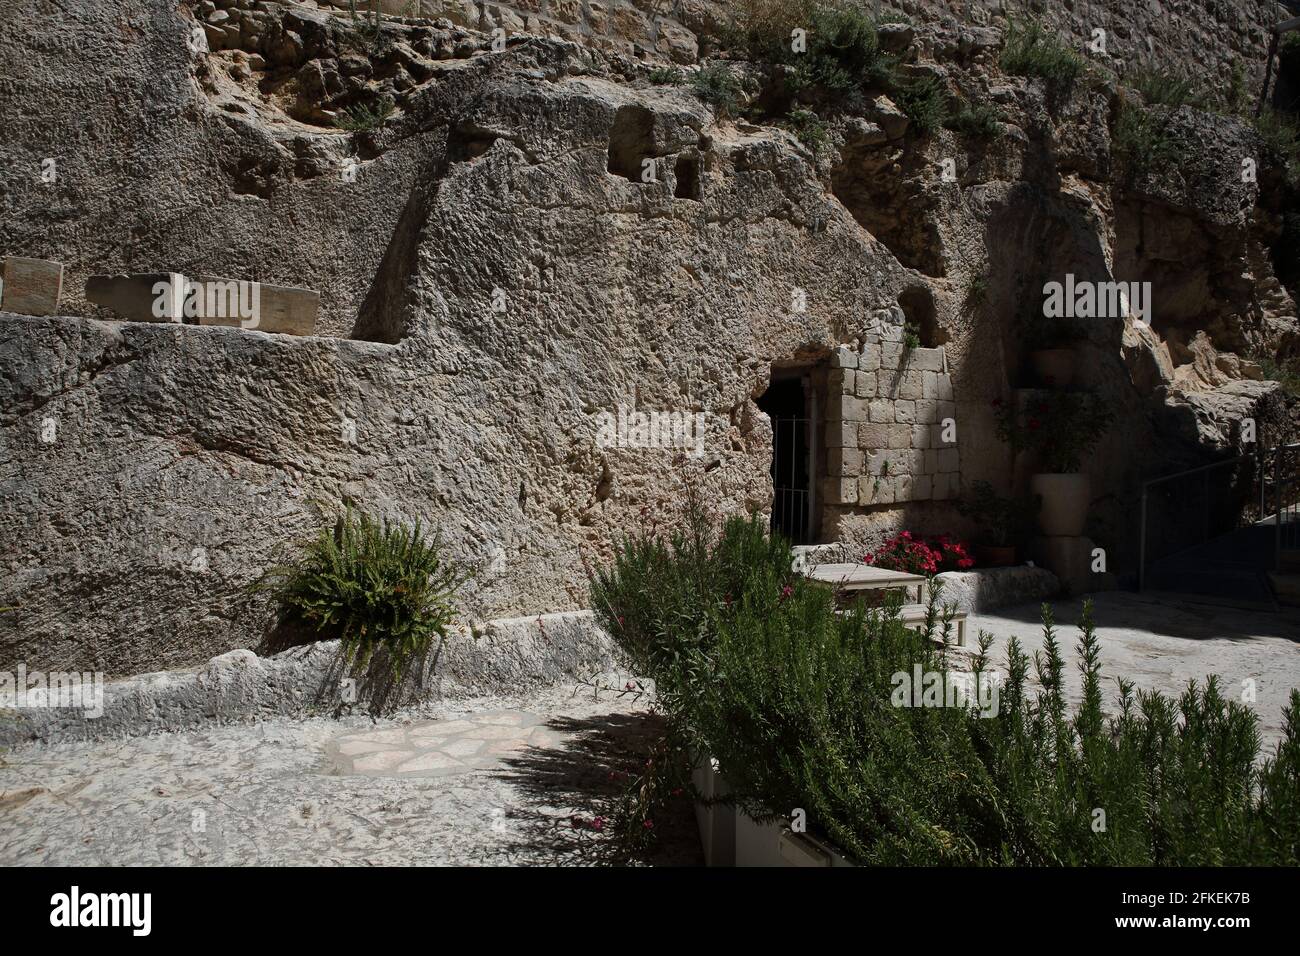 The Garden Tomb, an ancient Jewish burial cave outside the Old City of Jerusalem where some Christians believe Jesus was buried after crucifixion. Stock Photo